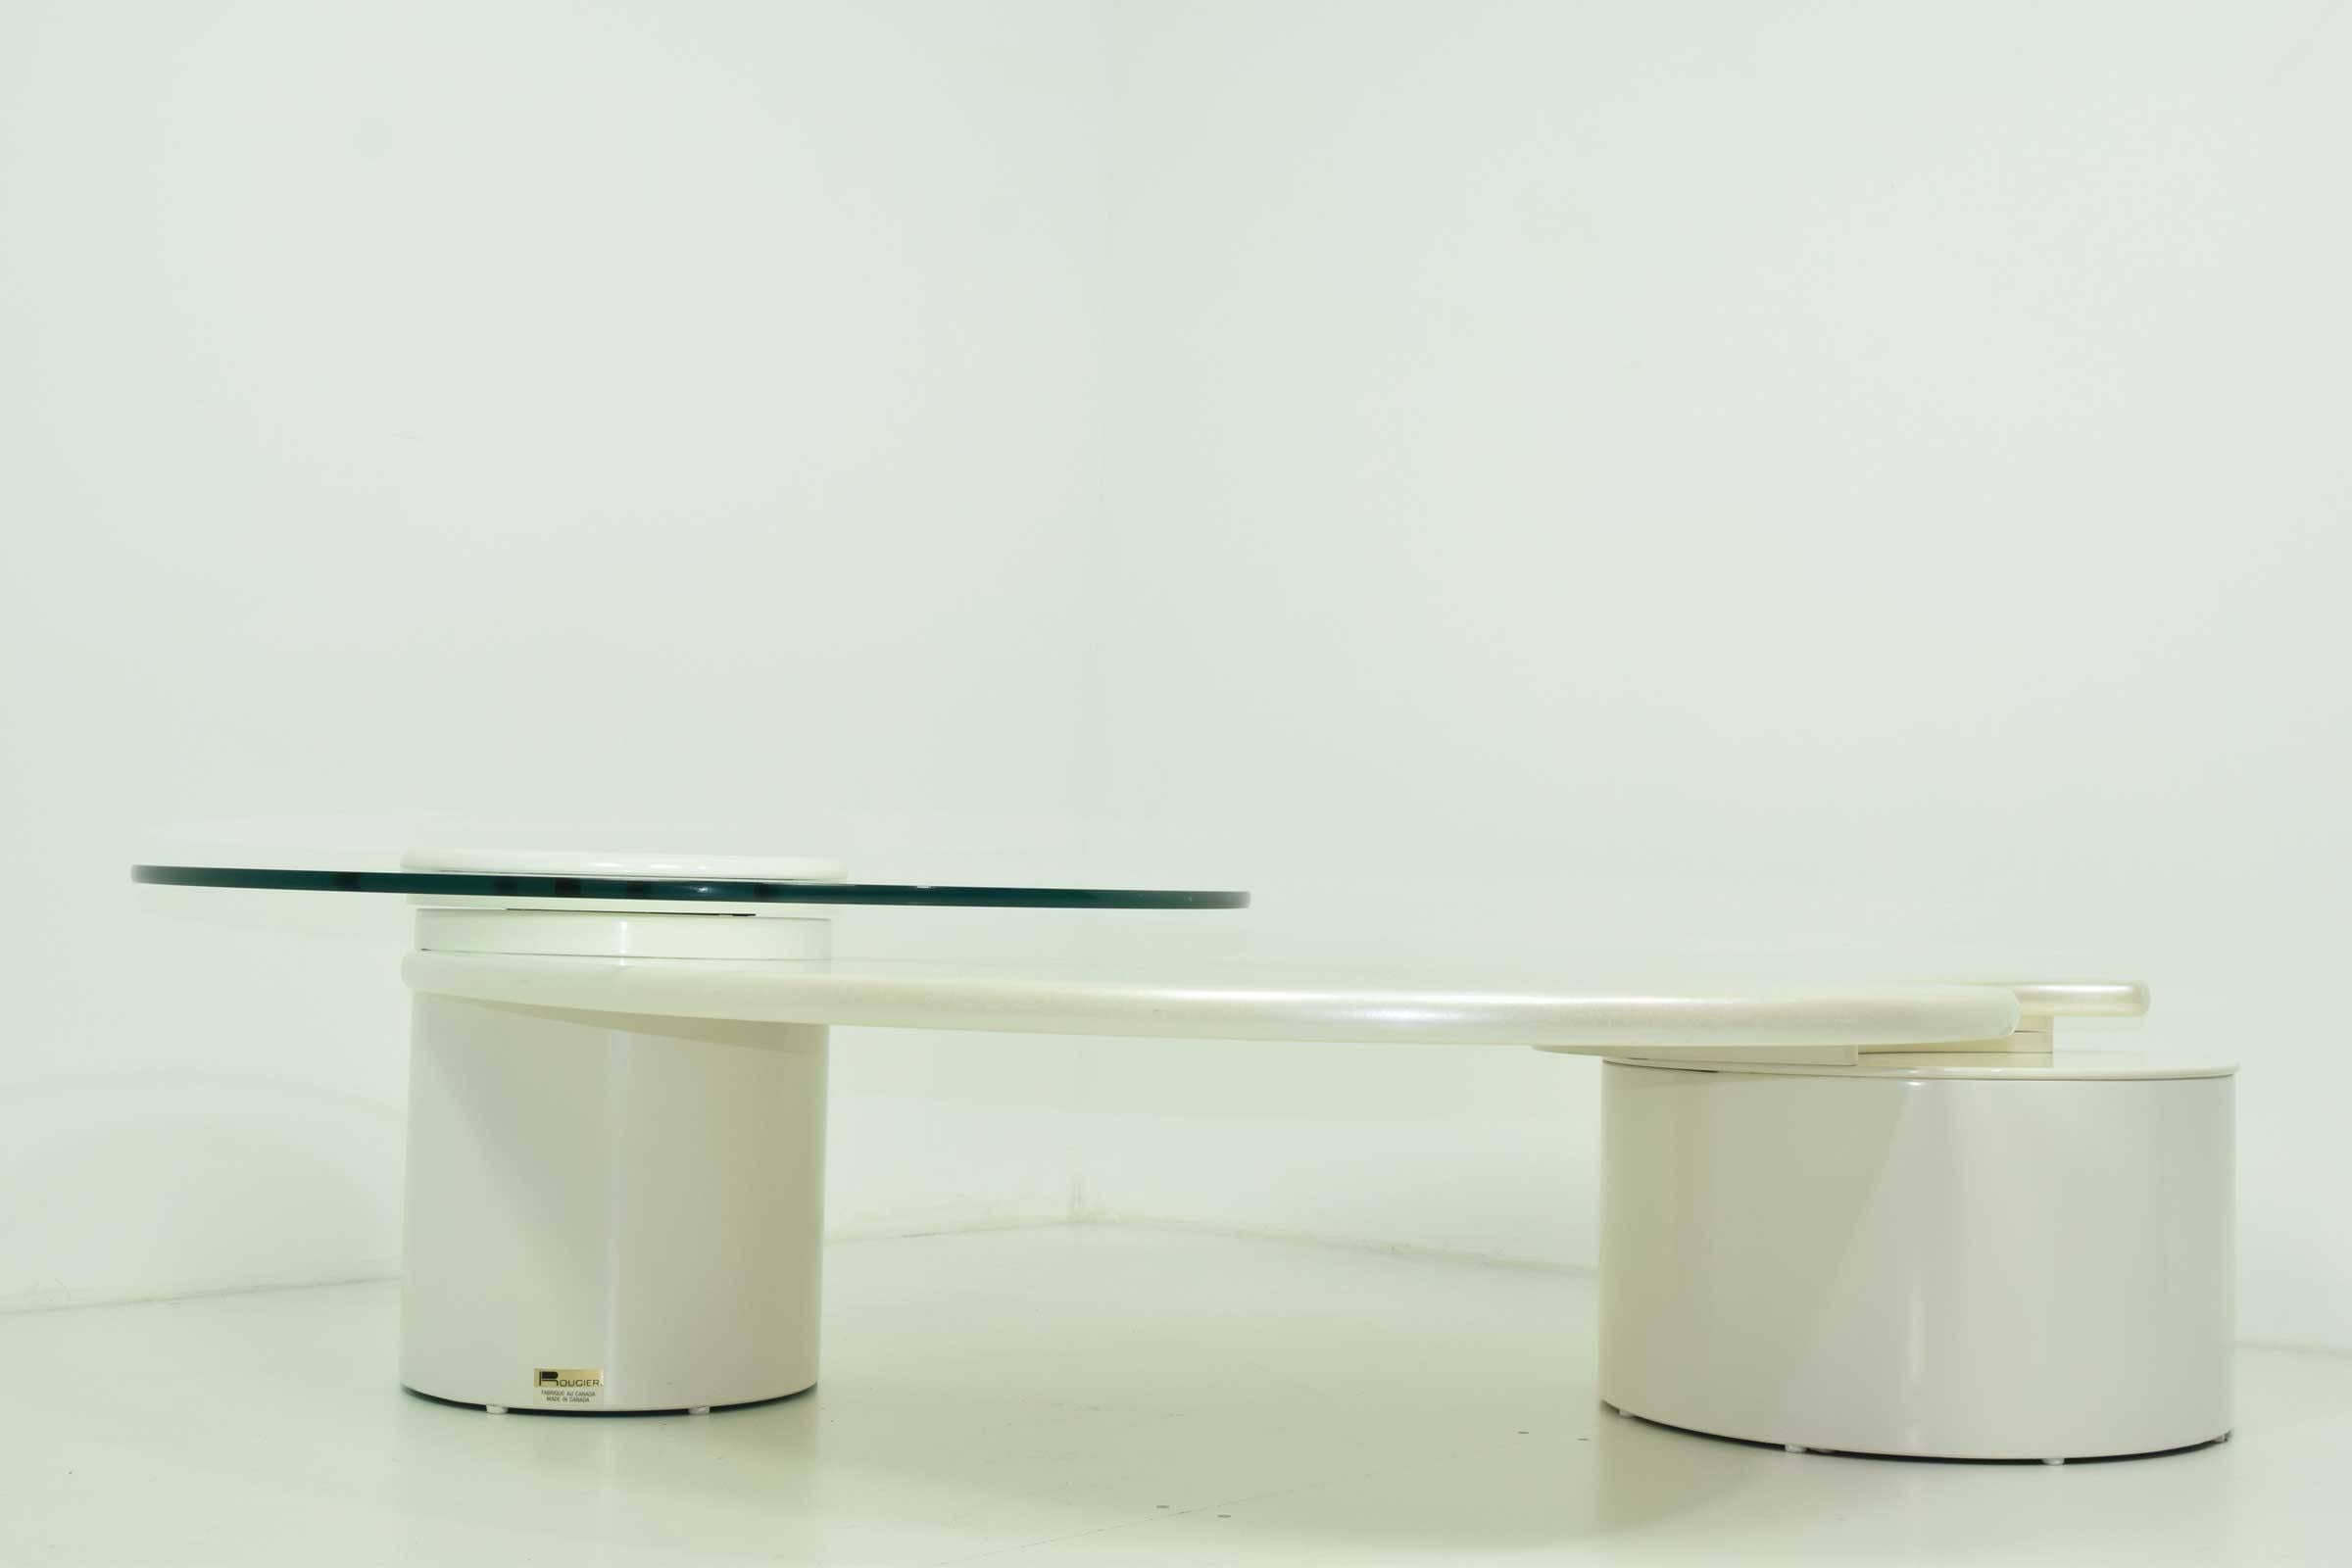 Coffee table is in white lacquer, with pearlized lacquer on centre section. Glass top section is movable and can be pulled out to extend. Table is very beautiful and unique. In great condition as well.